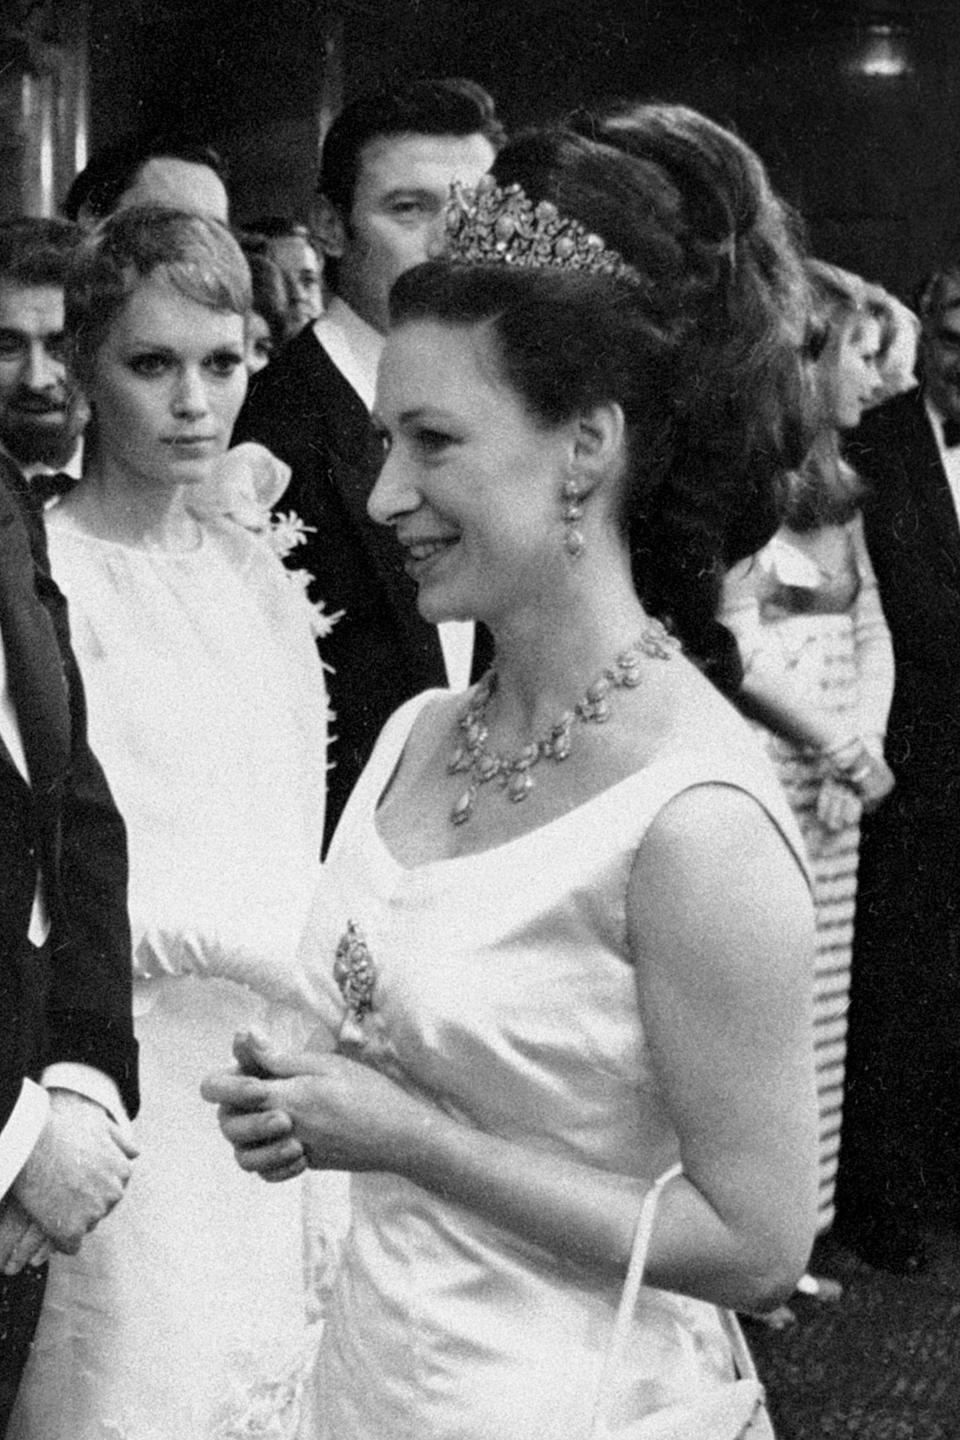 Margaret at the royal performance of "The Taming of the Shrew," the film starring Elizabeth Taylor and Richard Burton. Actors Mia Farrow and Lawrence Harvey are in the background.